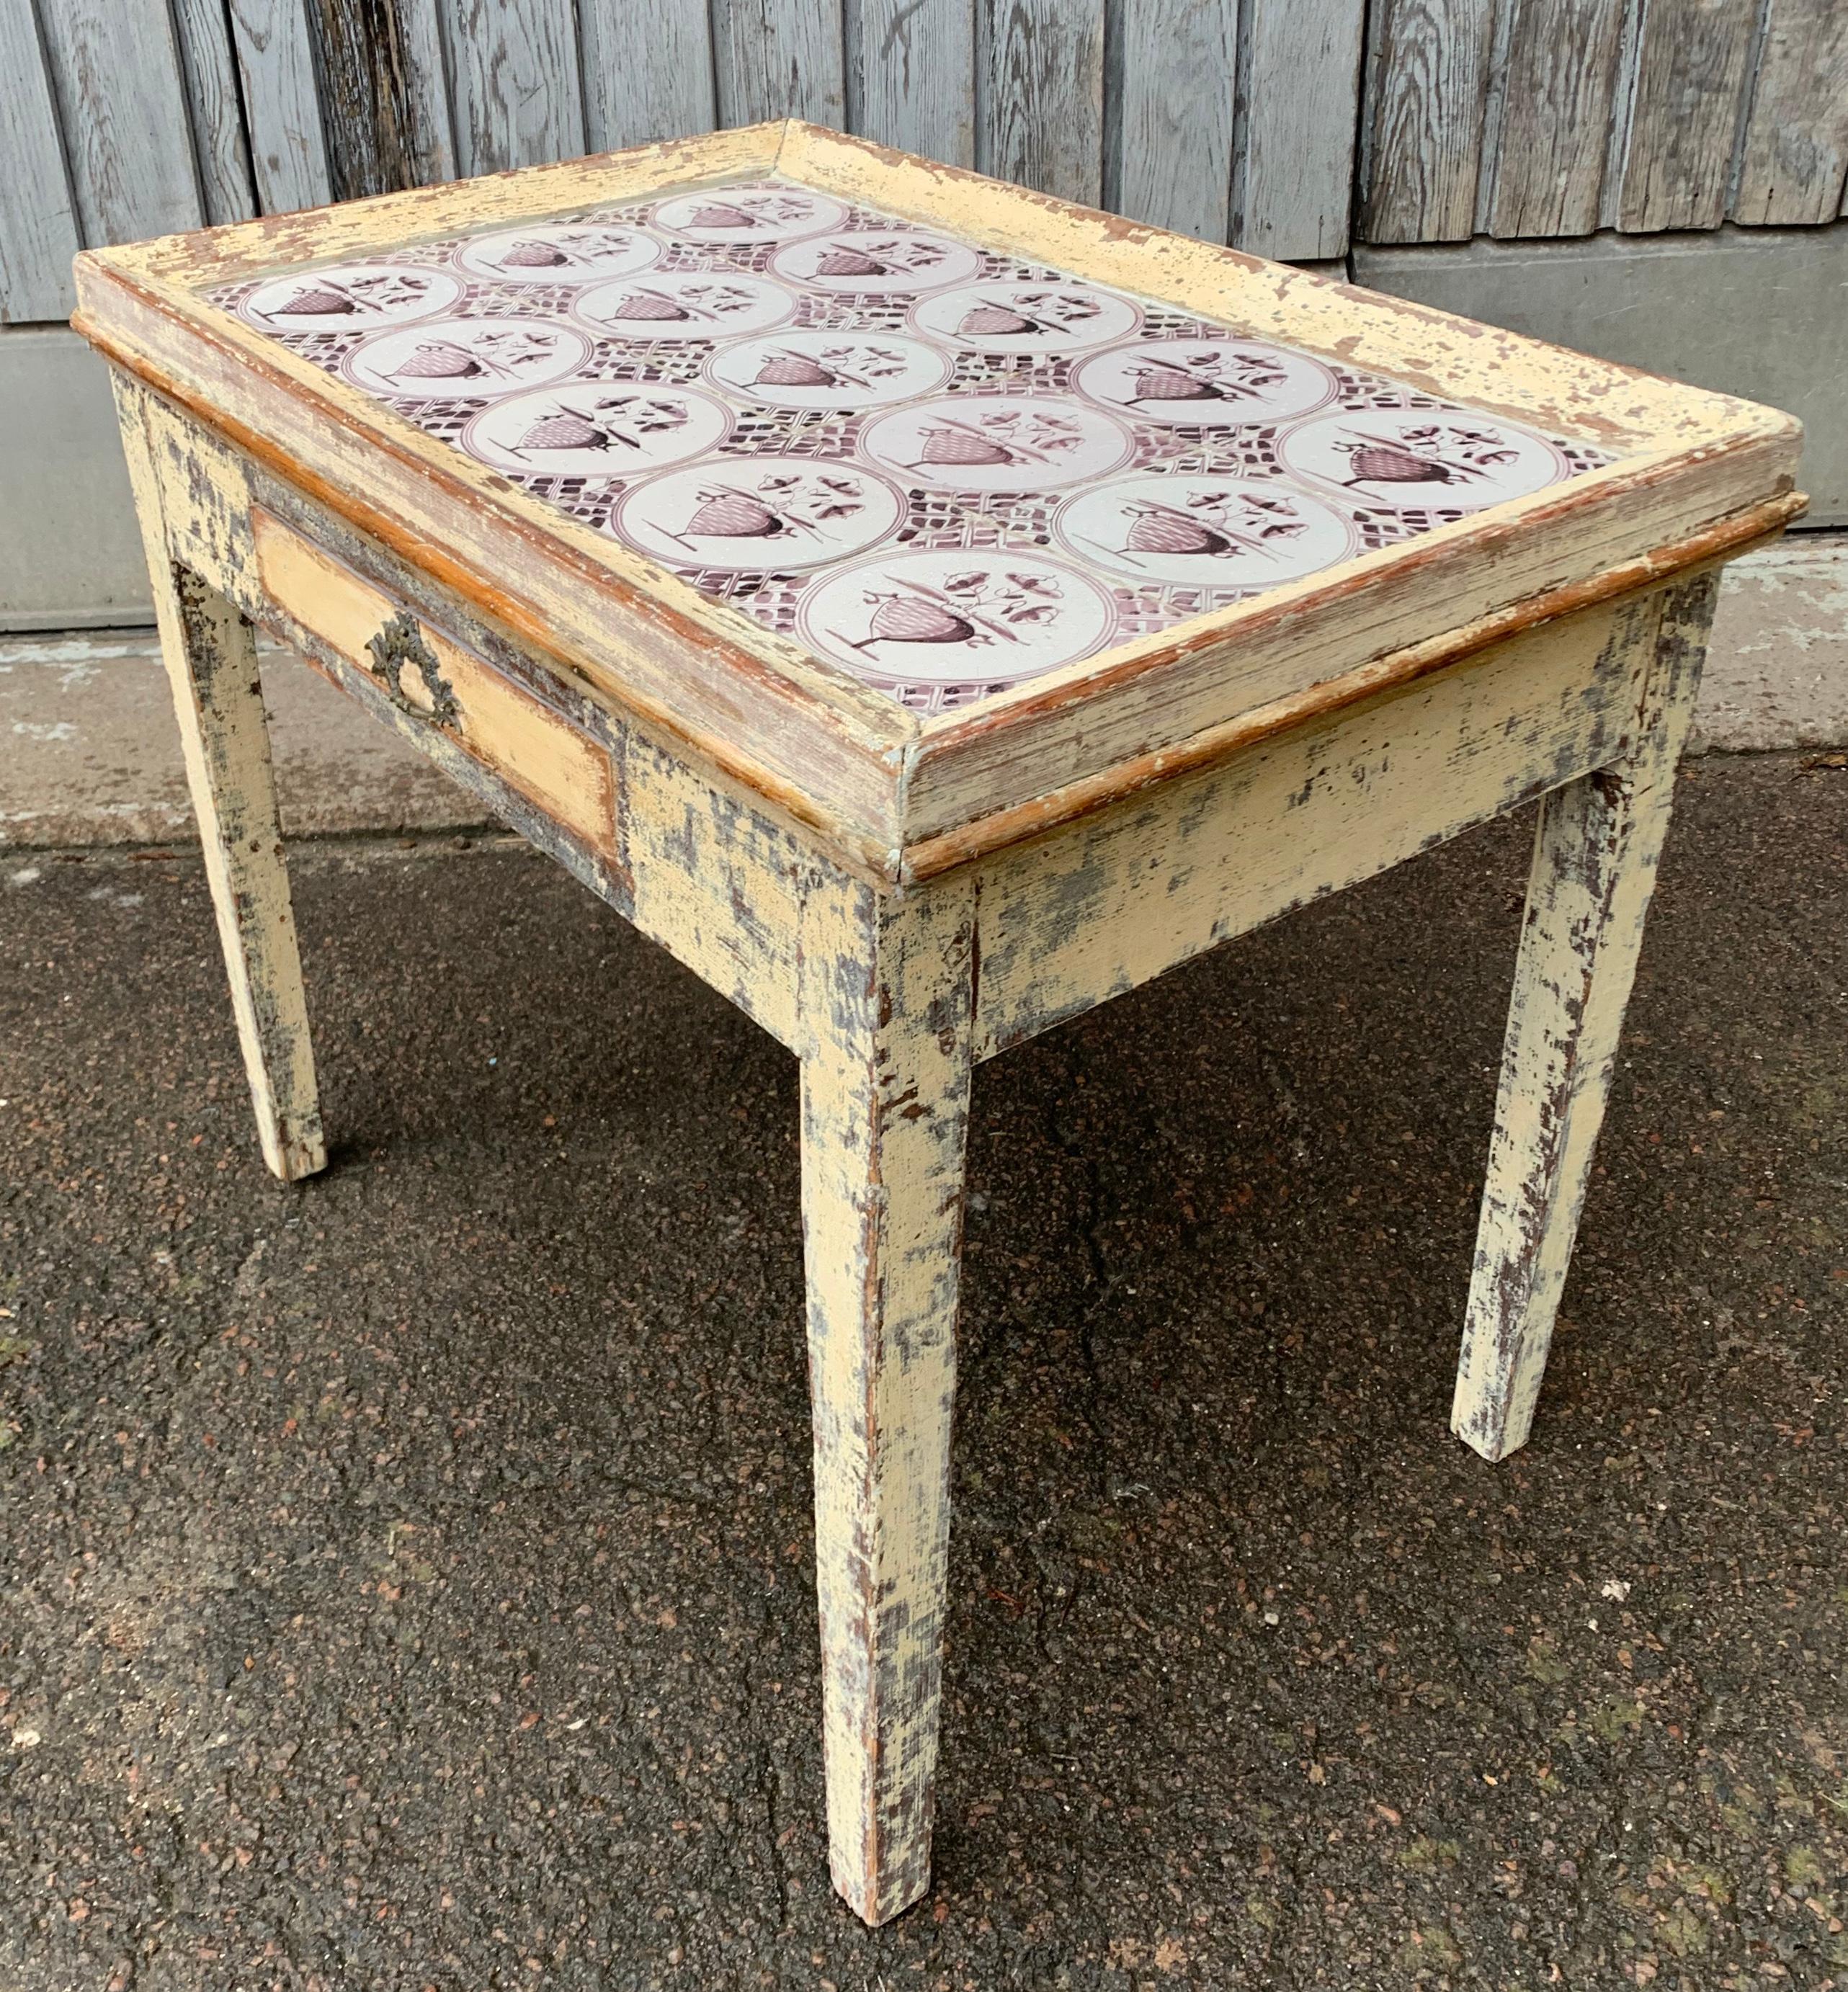 19th Century Swedish Gustavian Painted Delft Tile Table 2